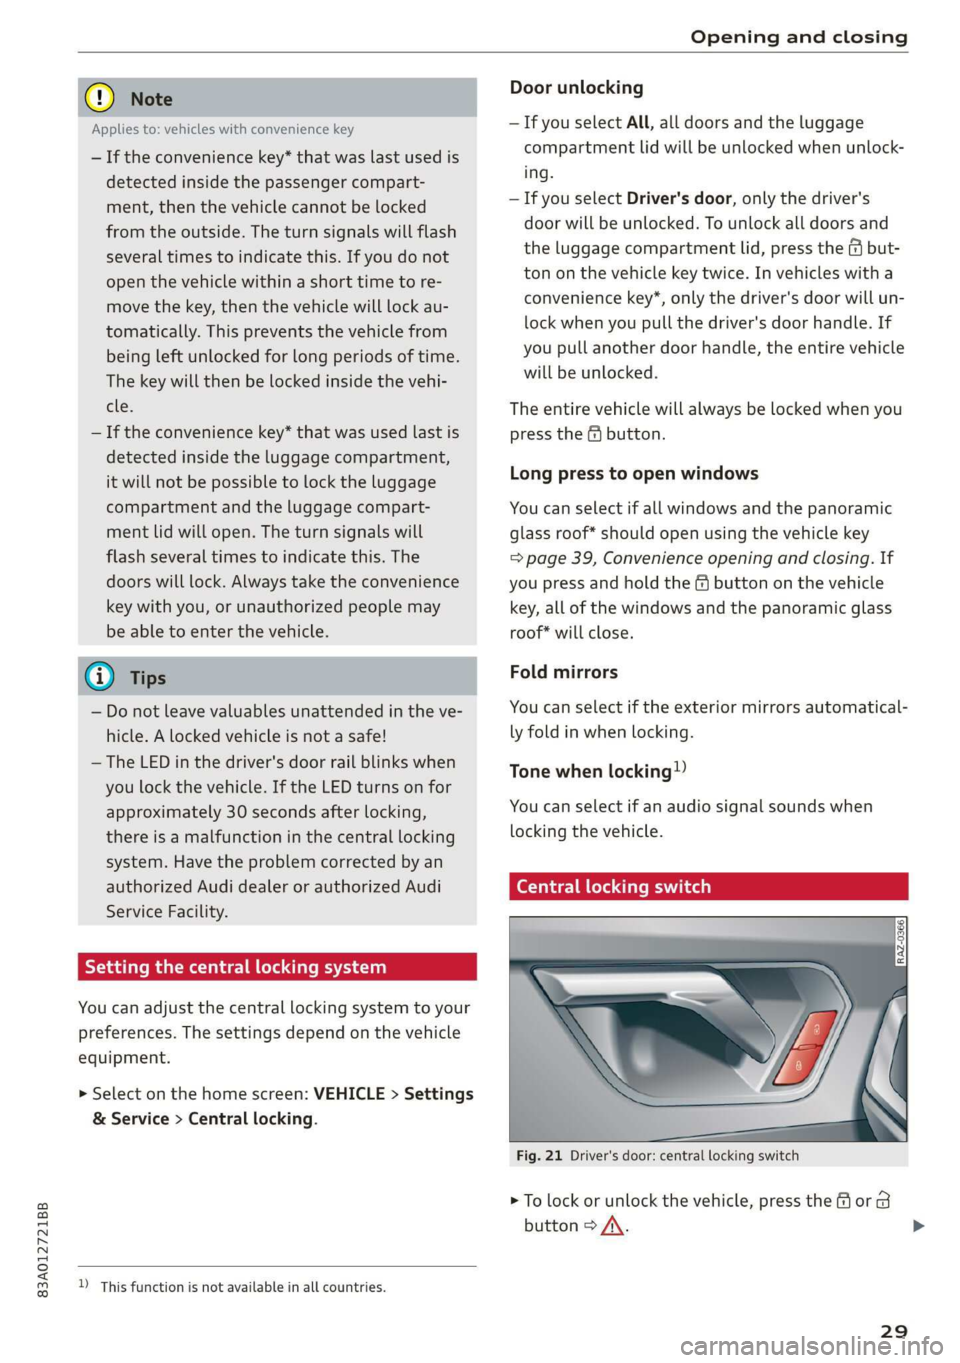 AUDI Q3 2020  Owners Manual 83A012721BB 
Opening and closing 
  
© Note 
Door unlocking 
—If you select All, all doors and the luggage 
compartment lid will be unlocked when unlock- 
ing. 
— If you select Driver's door,